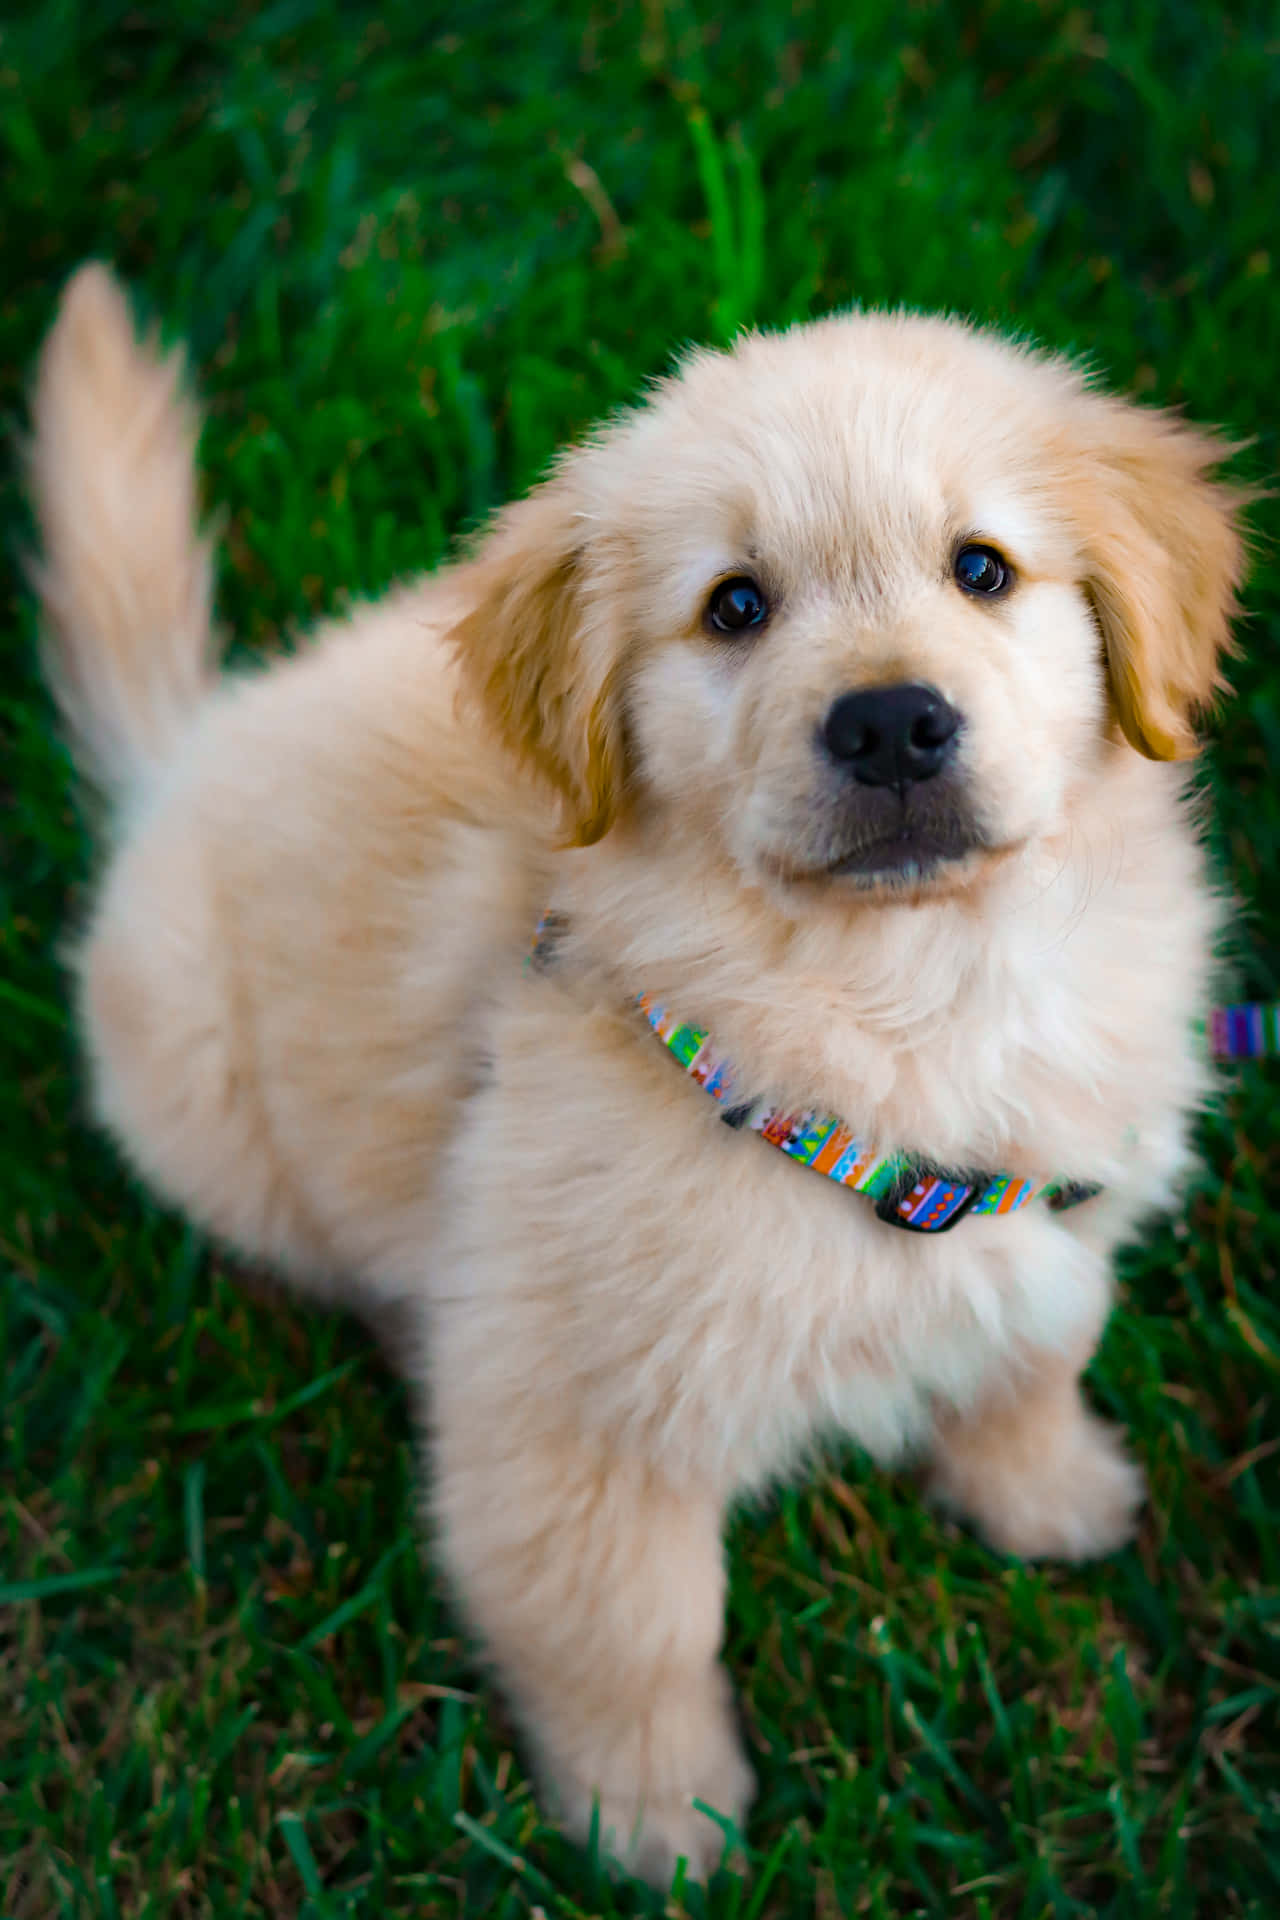 Adorable Puppy Dog Snuggling on the Grass